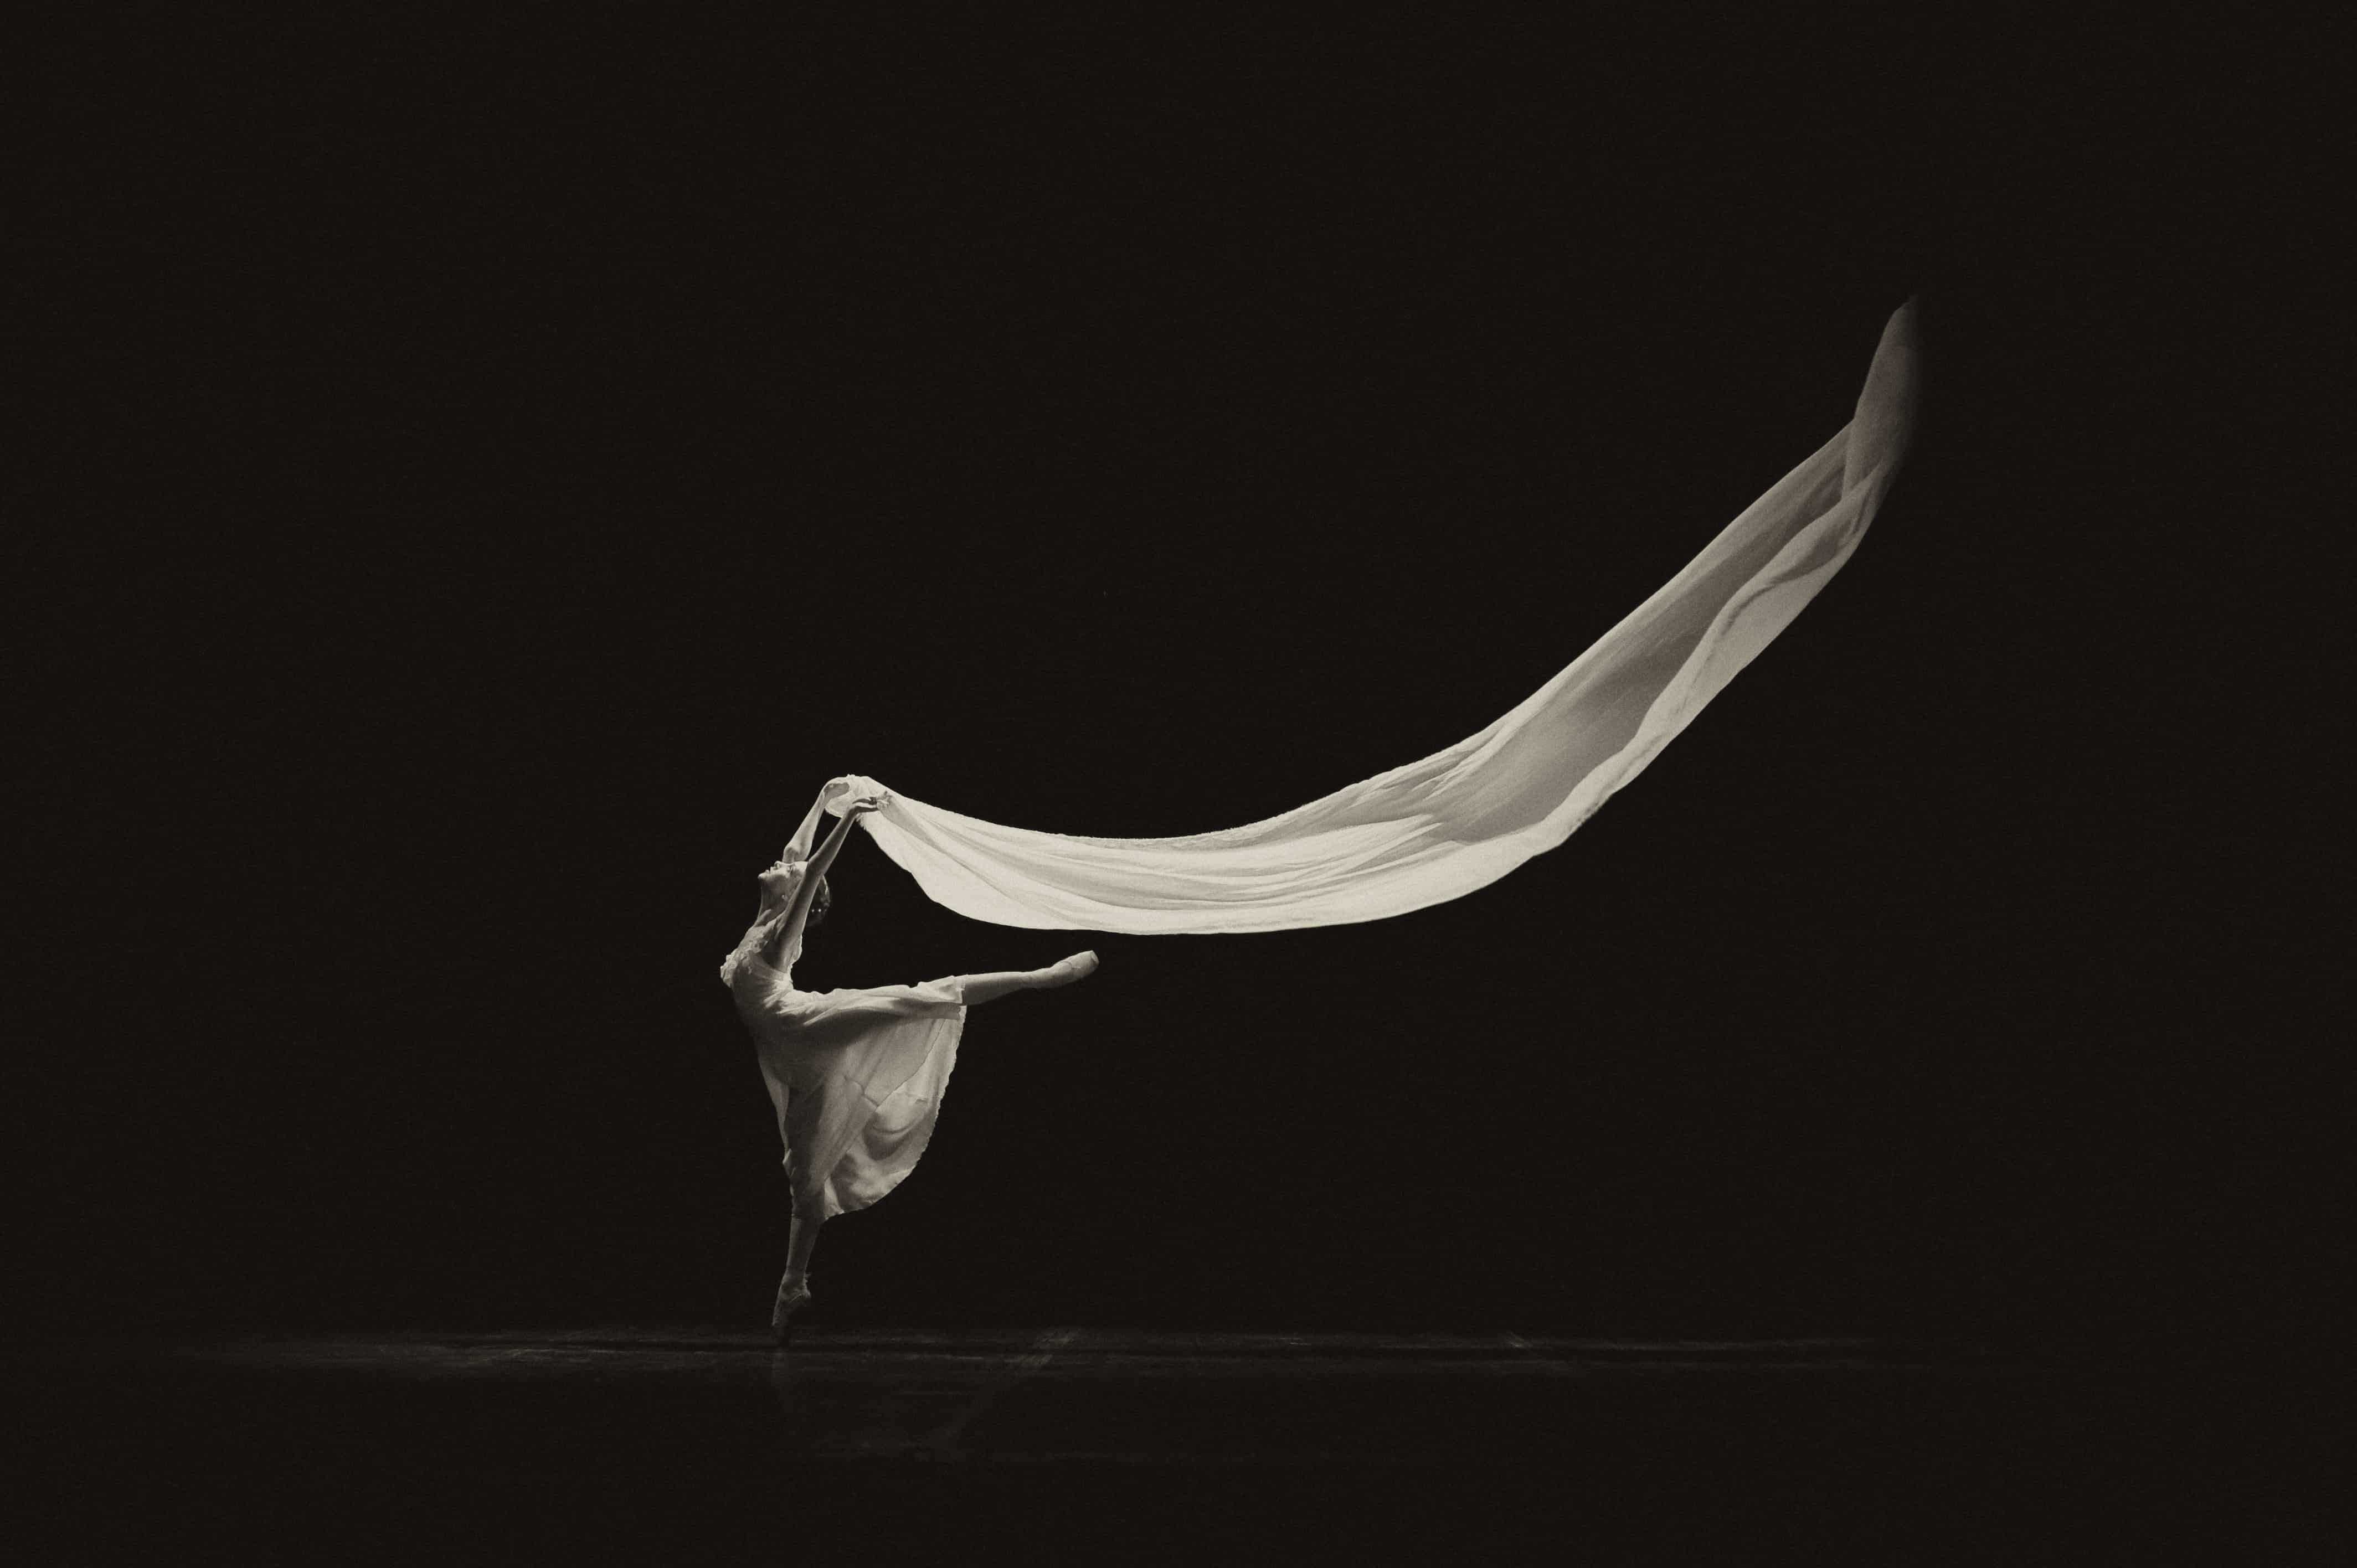 Black and white photo of ballet dancer en pointe holding beautiful flowing fabric behind her.